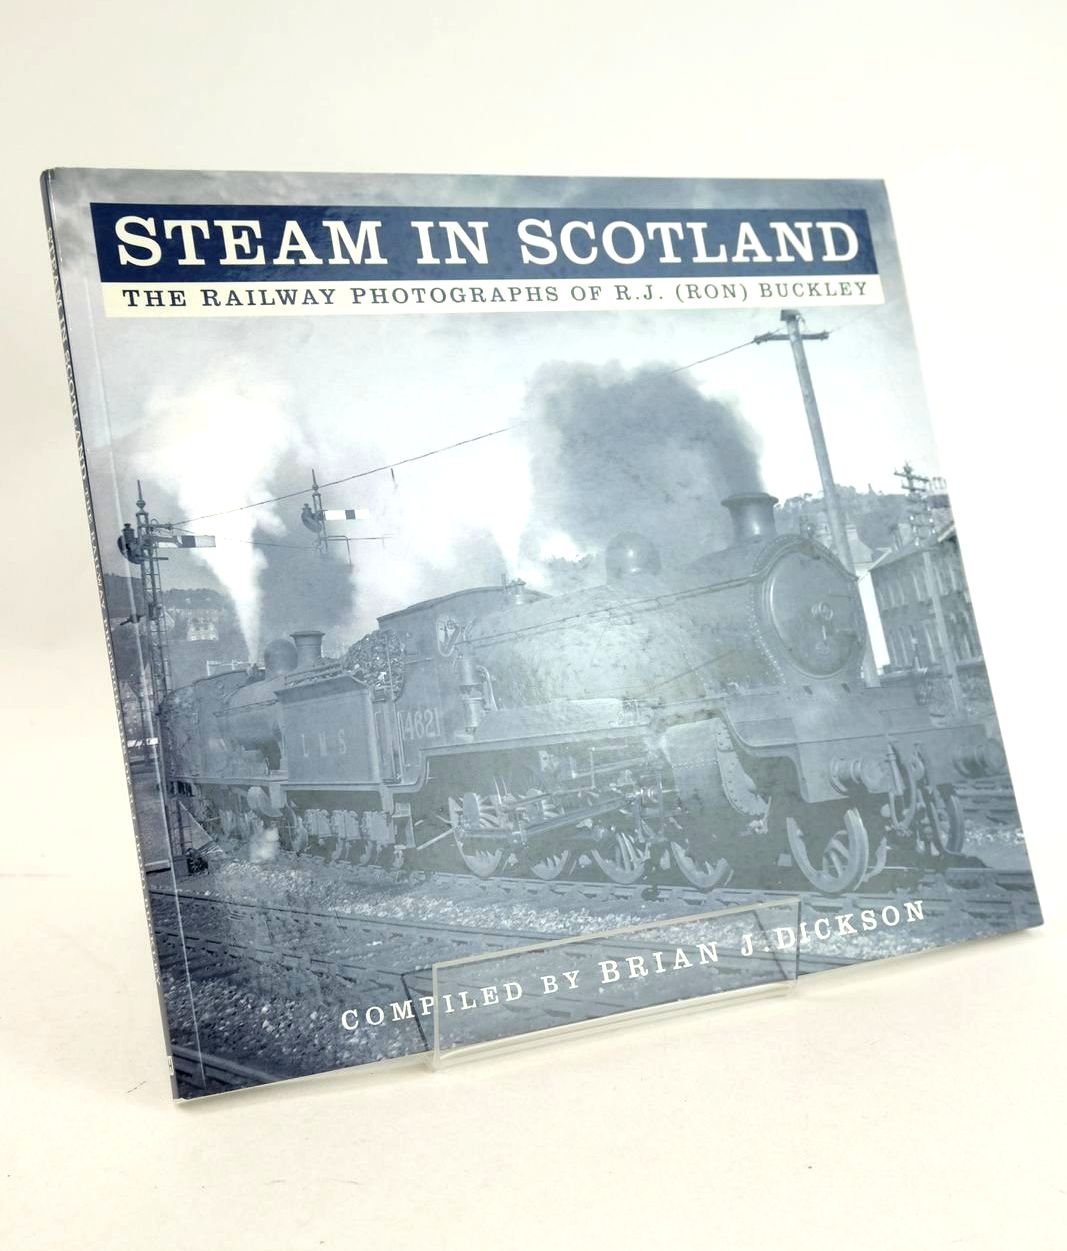 Photo of STEAM IN SCOTLAND: THE RAILWAY PHOTOGRAPHS OF R.J. (RON) BUCKLEY written by Dickson, Brian J. illustrated by Buckley, R.J. published by The History Press (STOCK CODE: 1326941)  for sale by Stella & Rose's Books